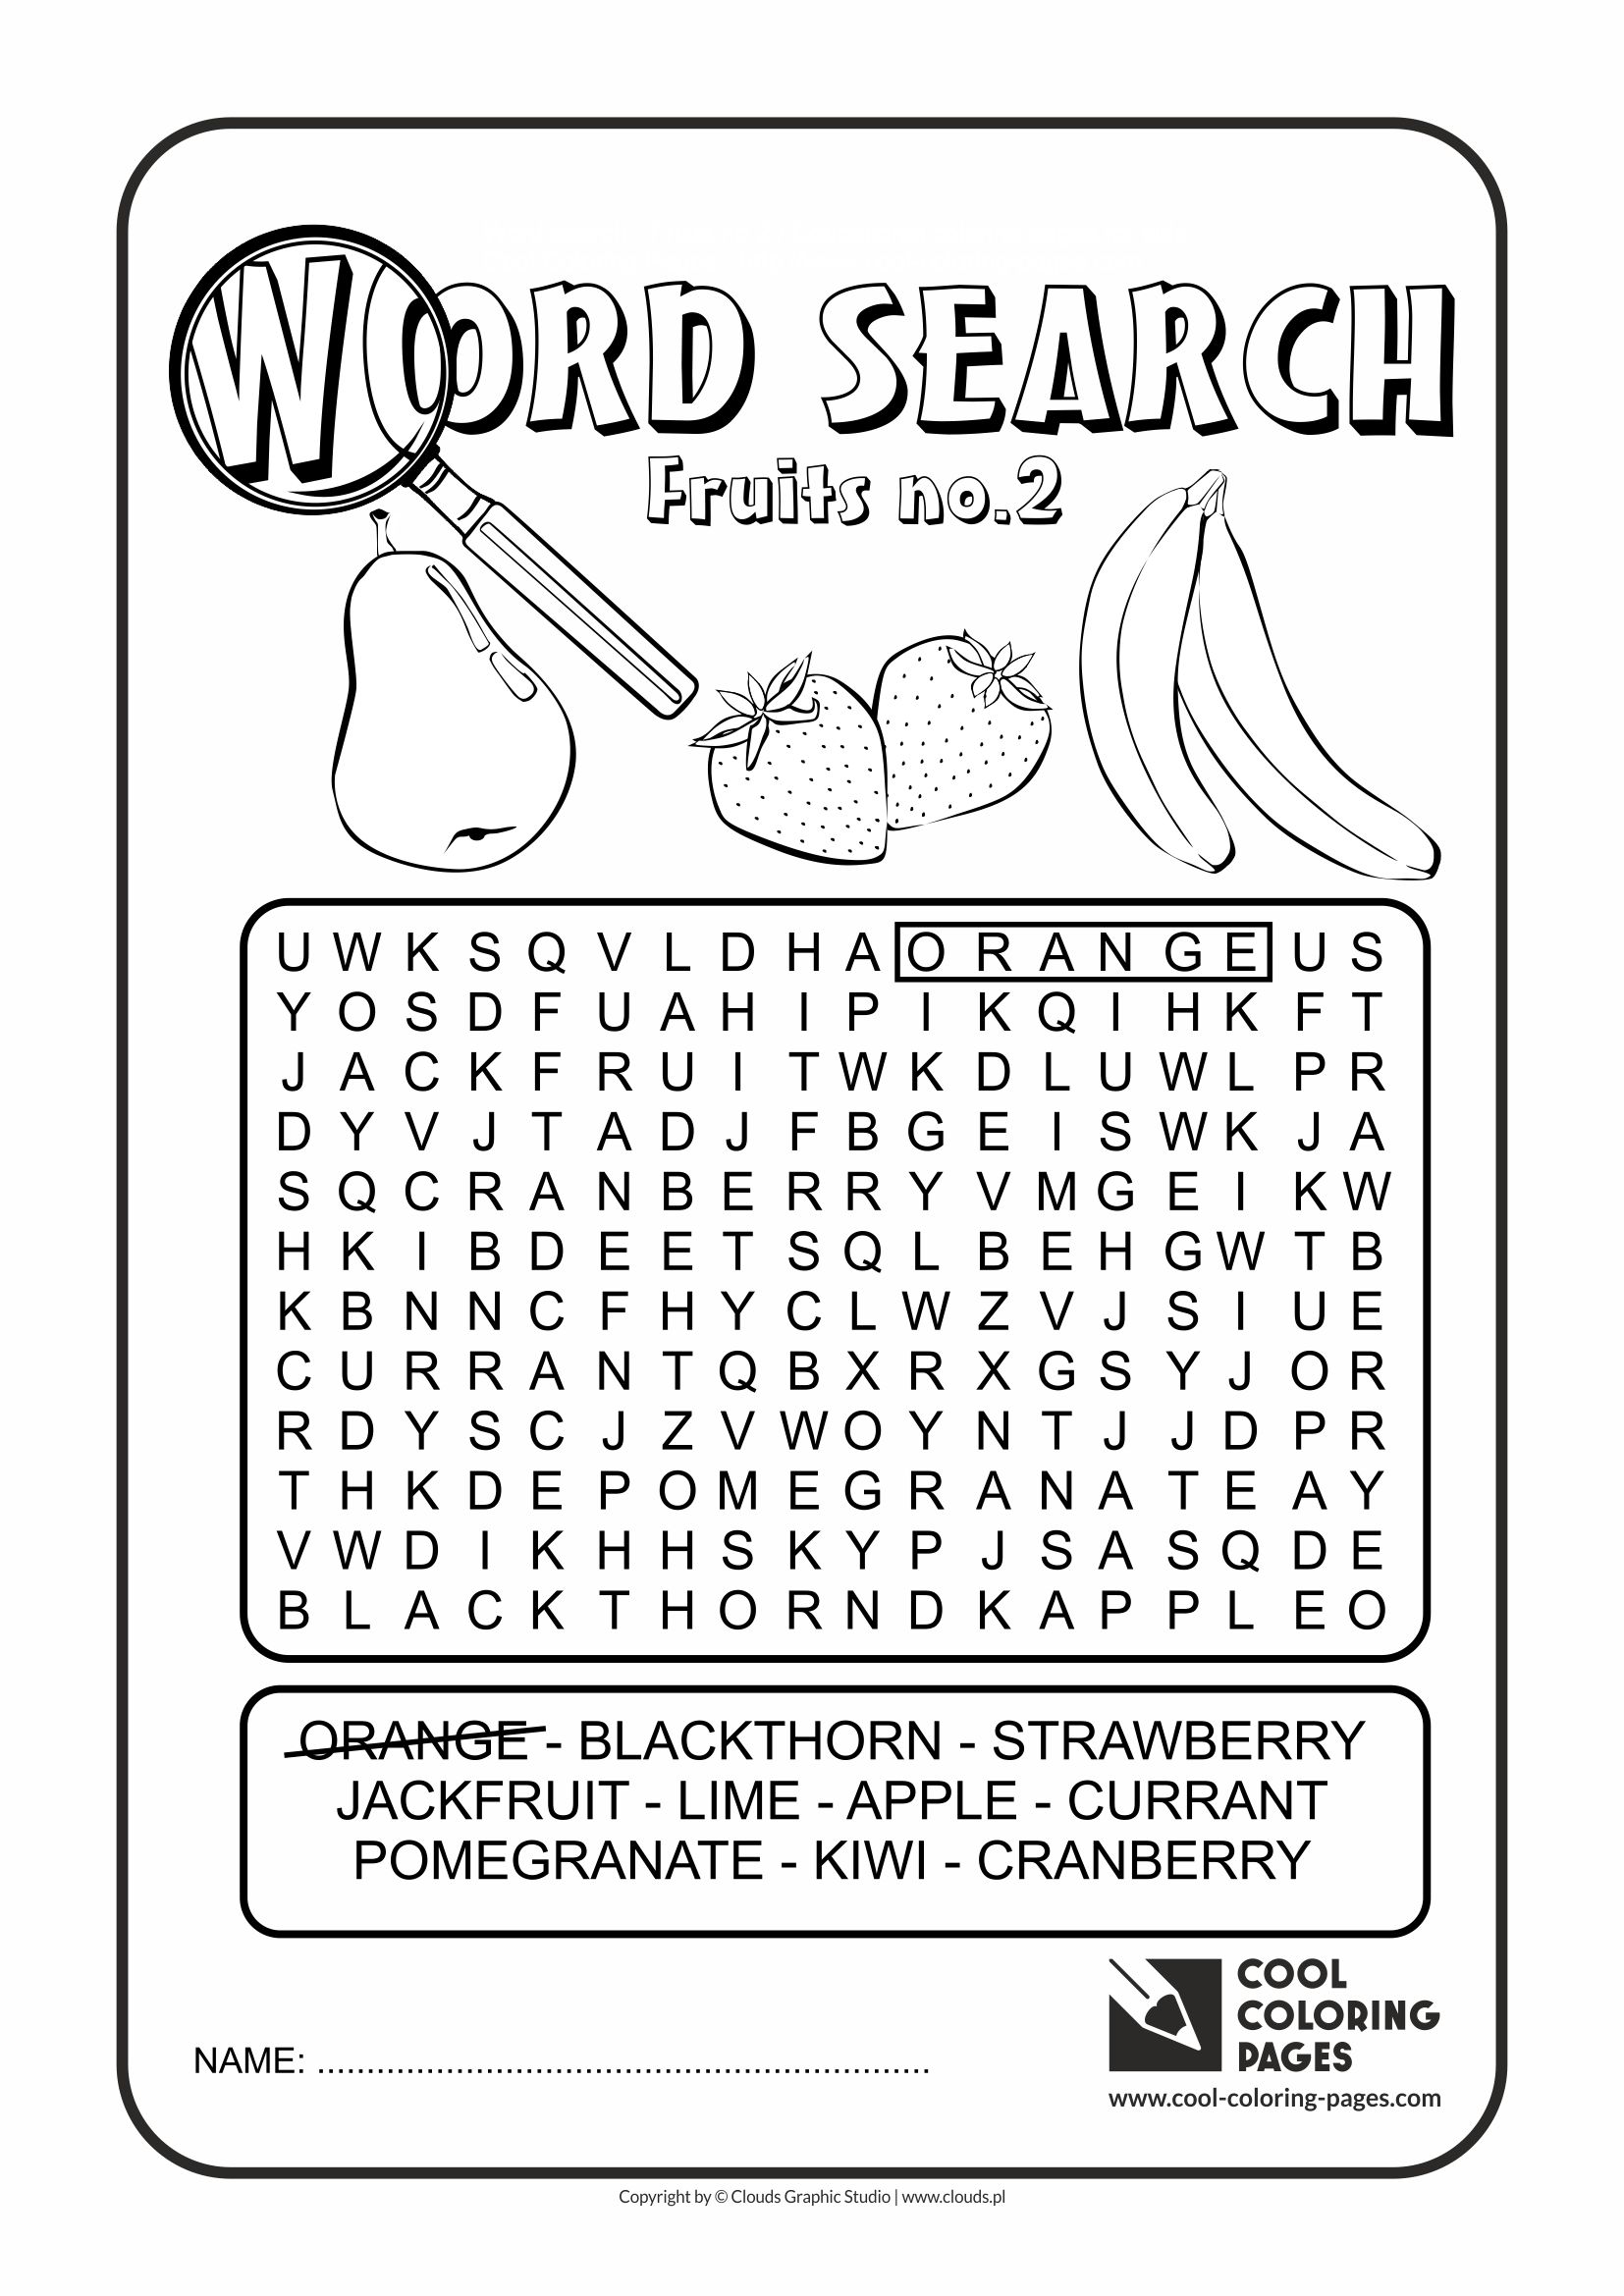 Cool Coloring Pages Word Search - Cool Coloring Pages | Free